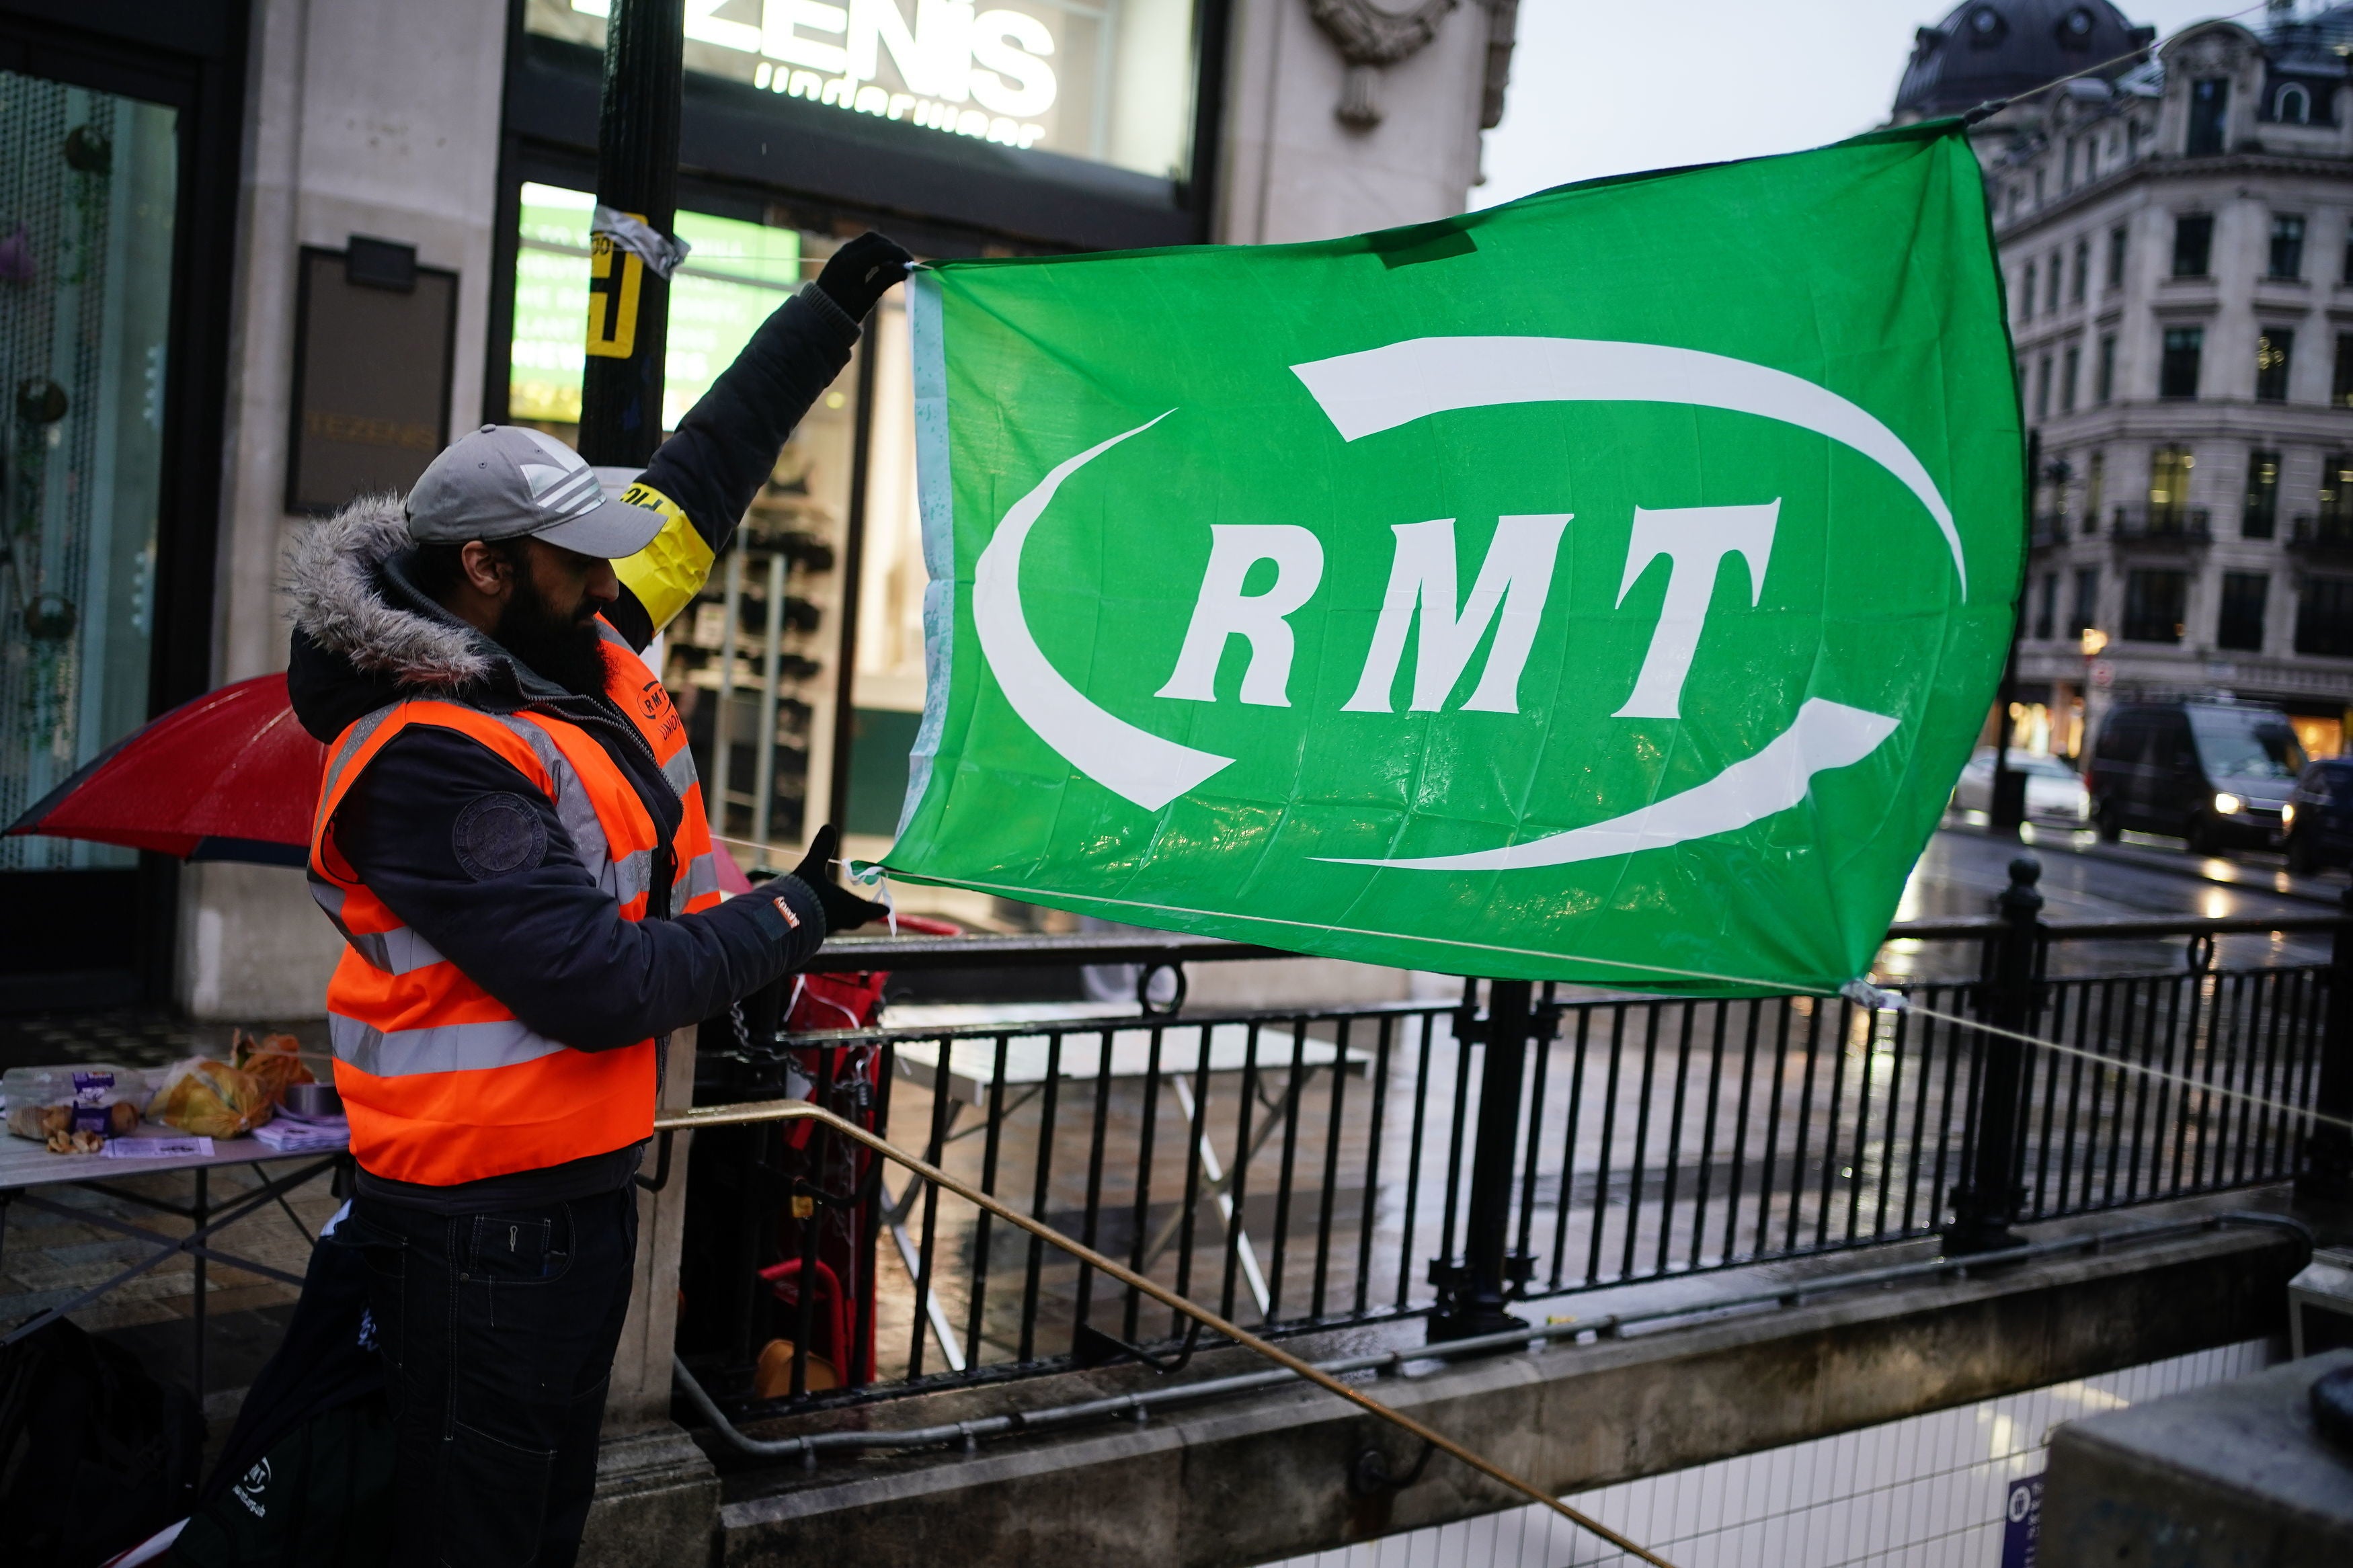 Members of the RMT trade union on a picket line in central London in March